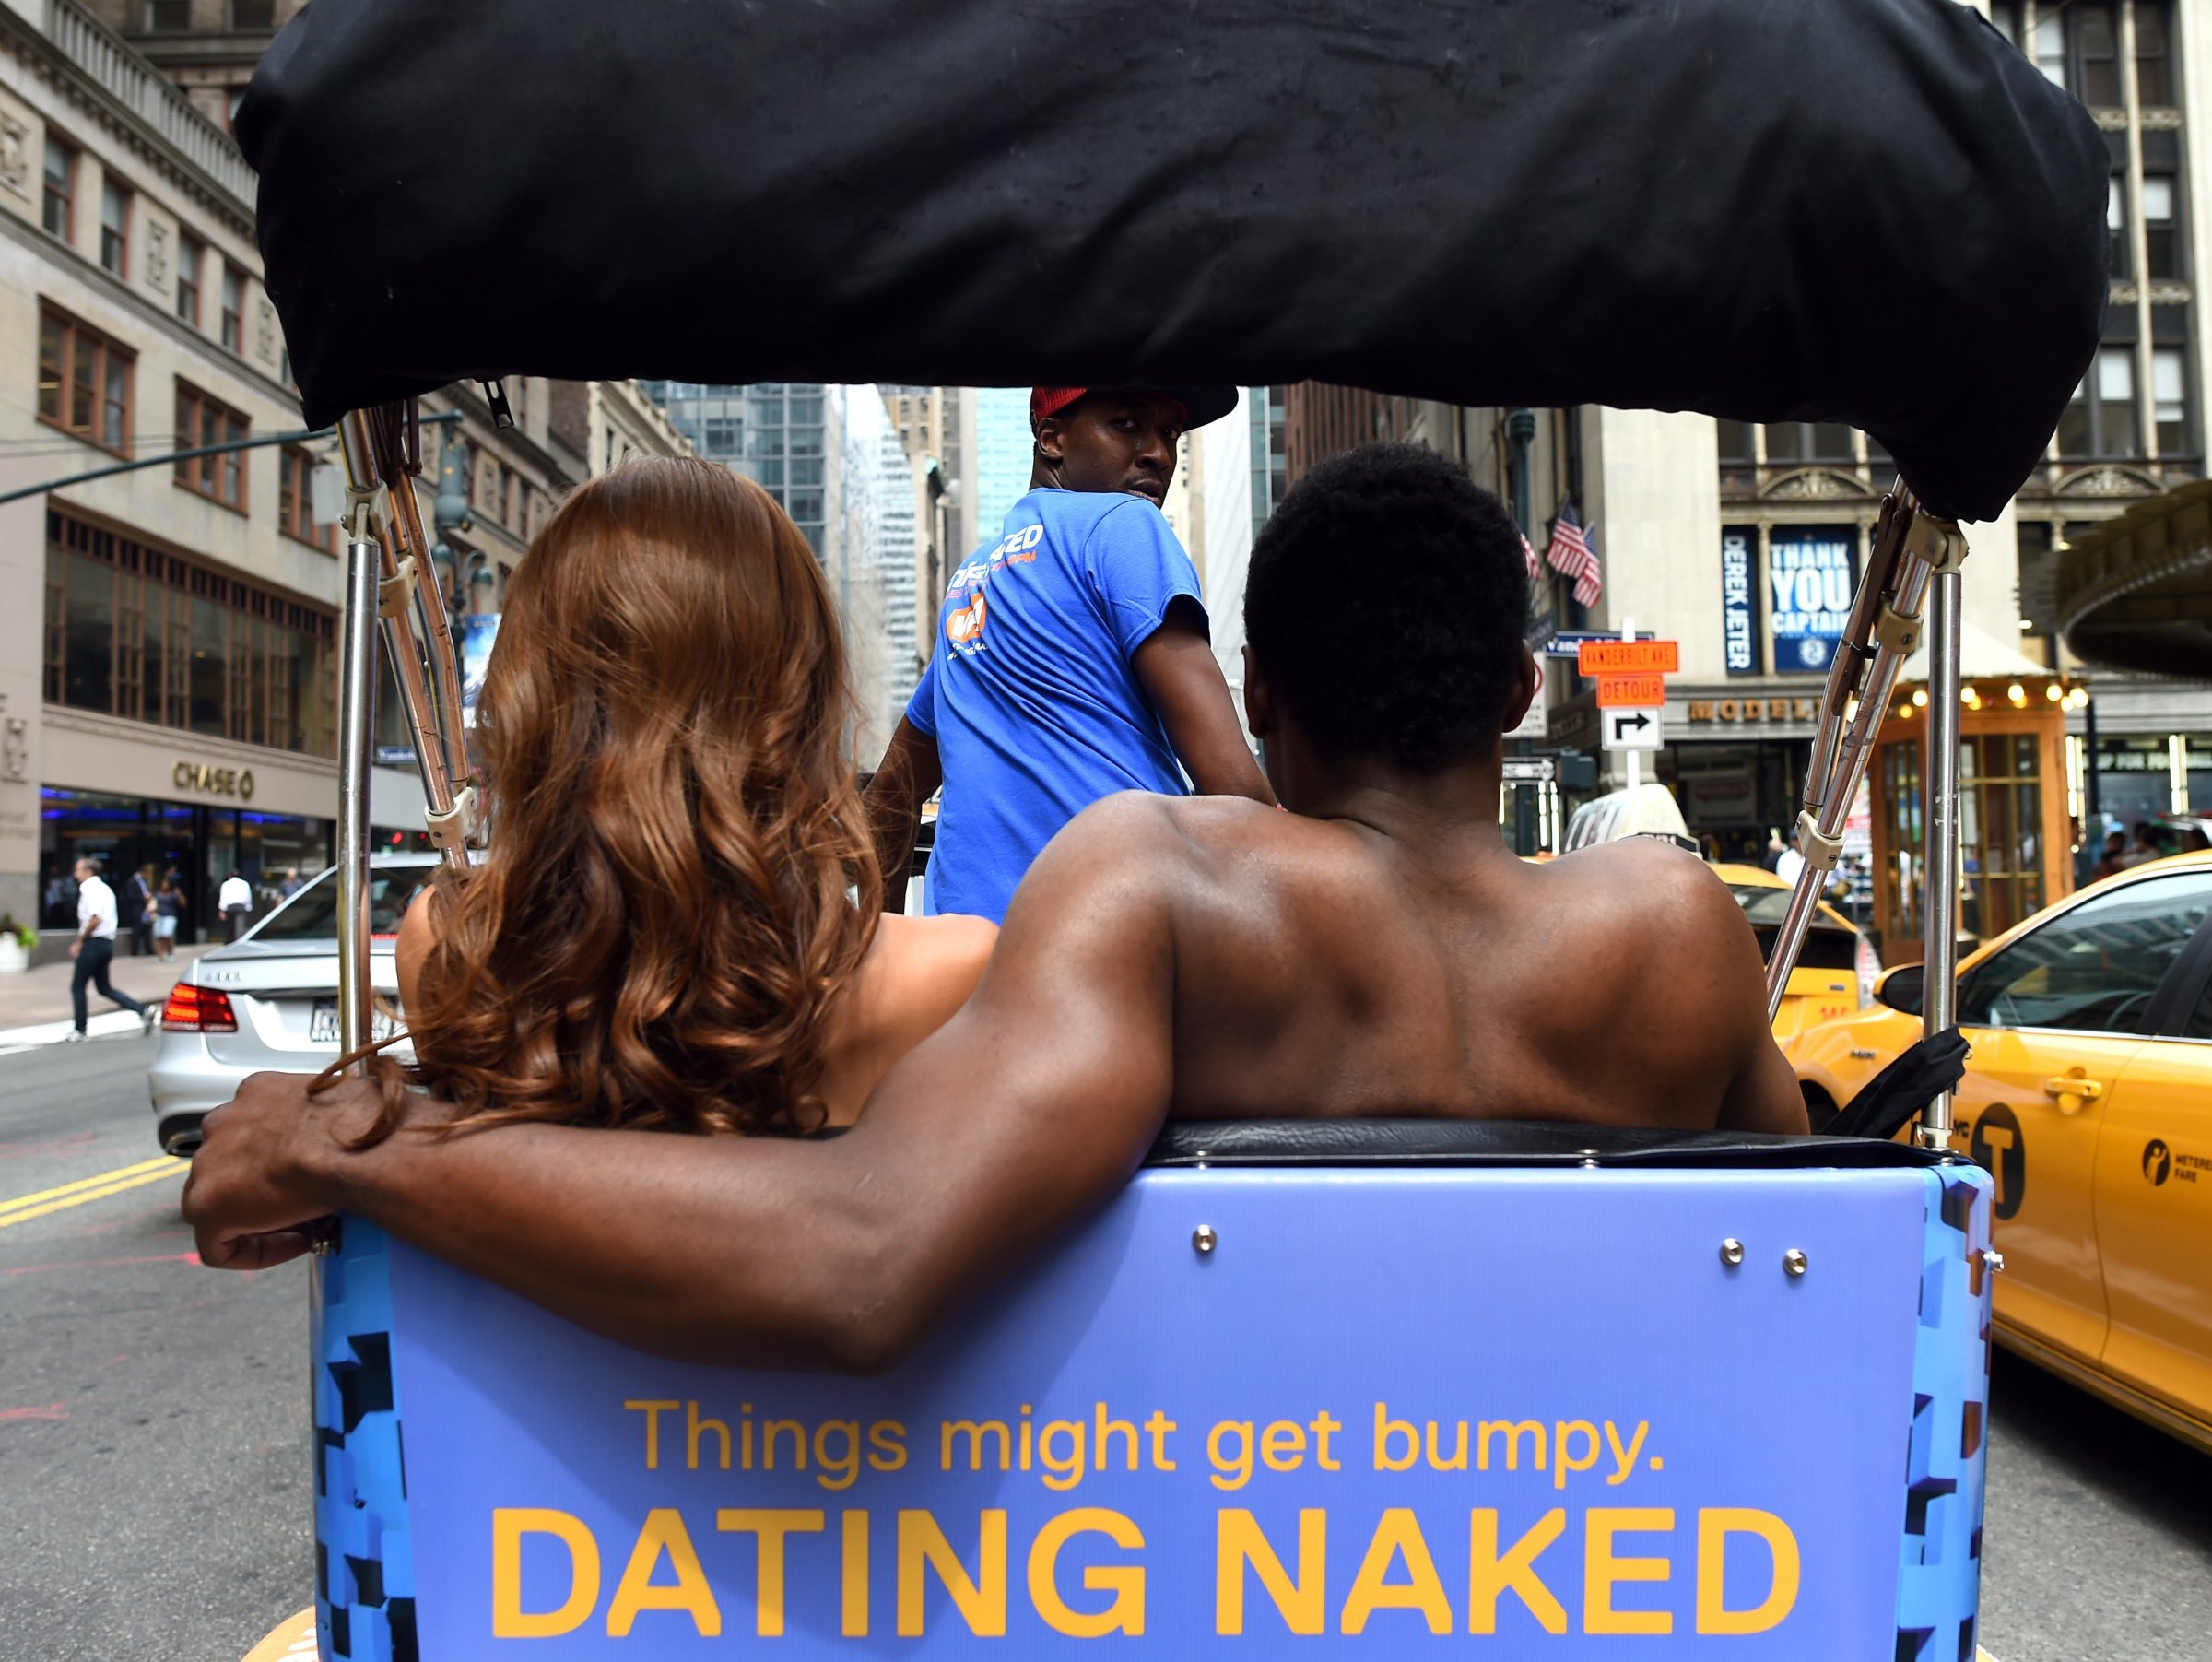 Kelly Keodara and Yarc Lewinson ride around Grand Central Station in New York City on July 16, 2014 in a pedicab to promote a new VH1 series "Dating Naked".